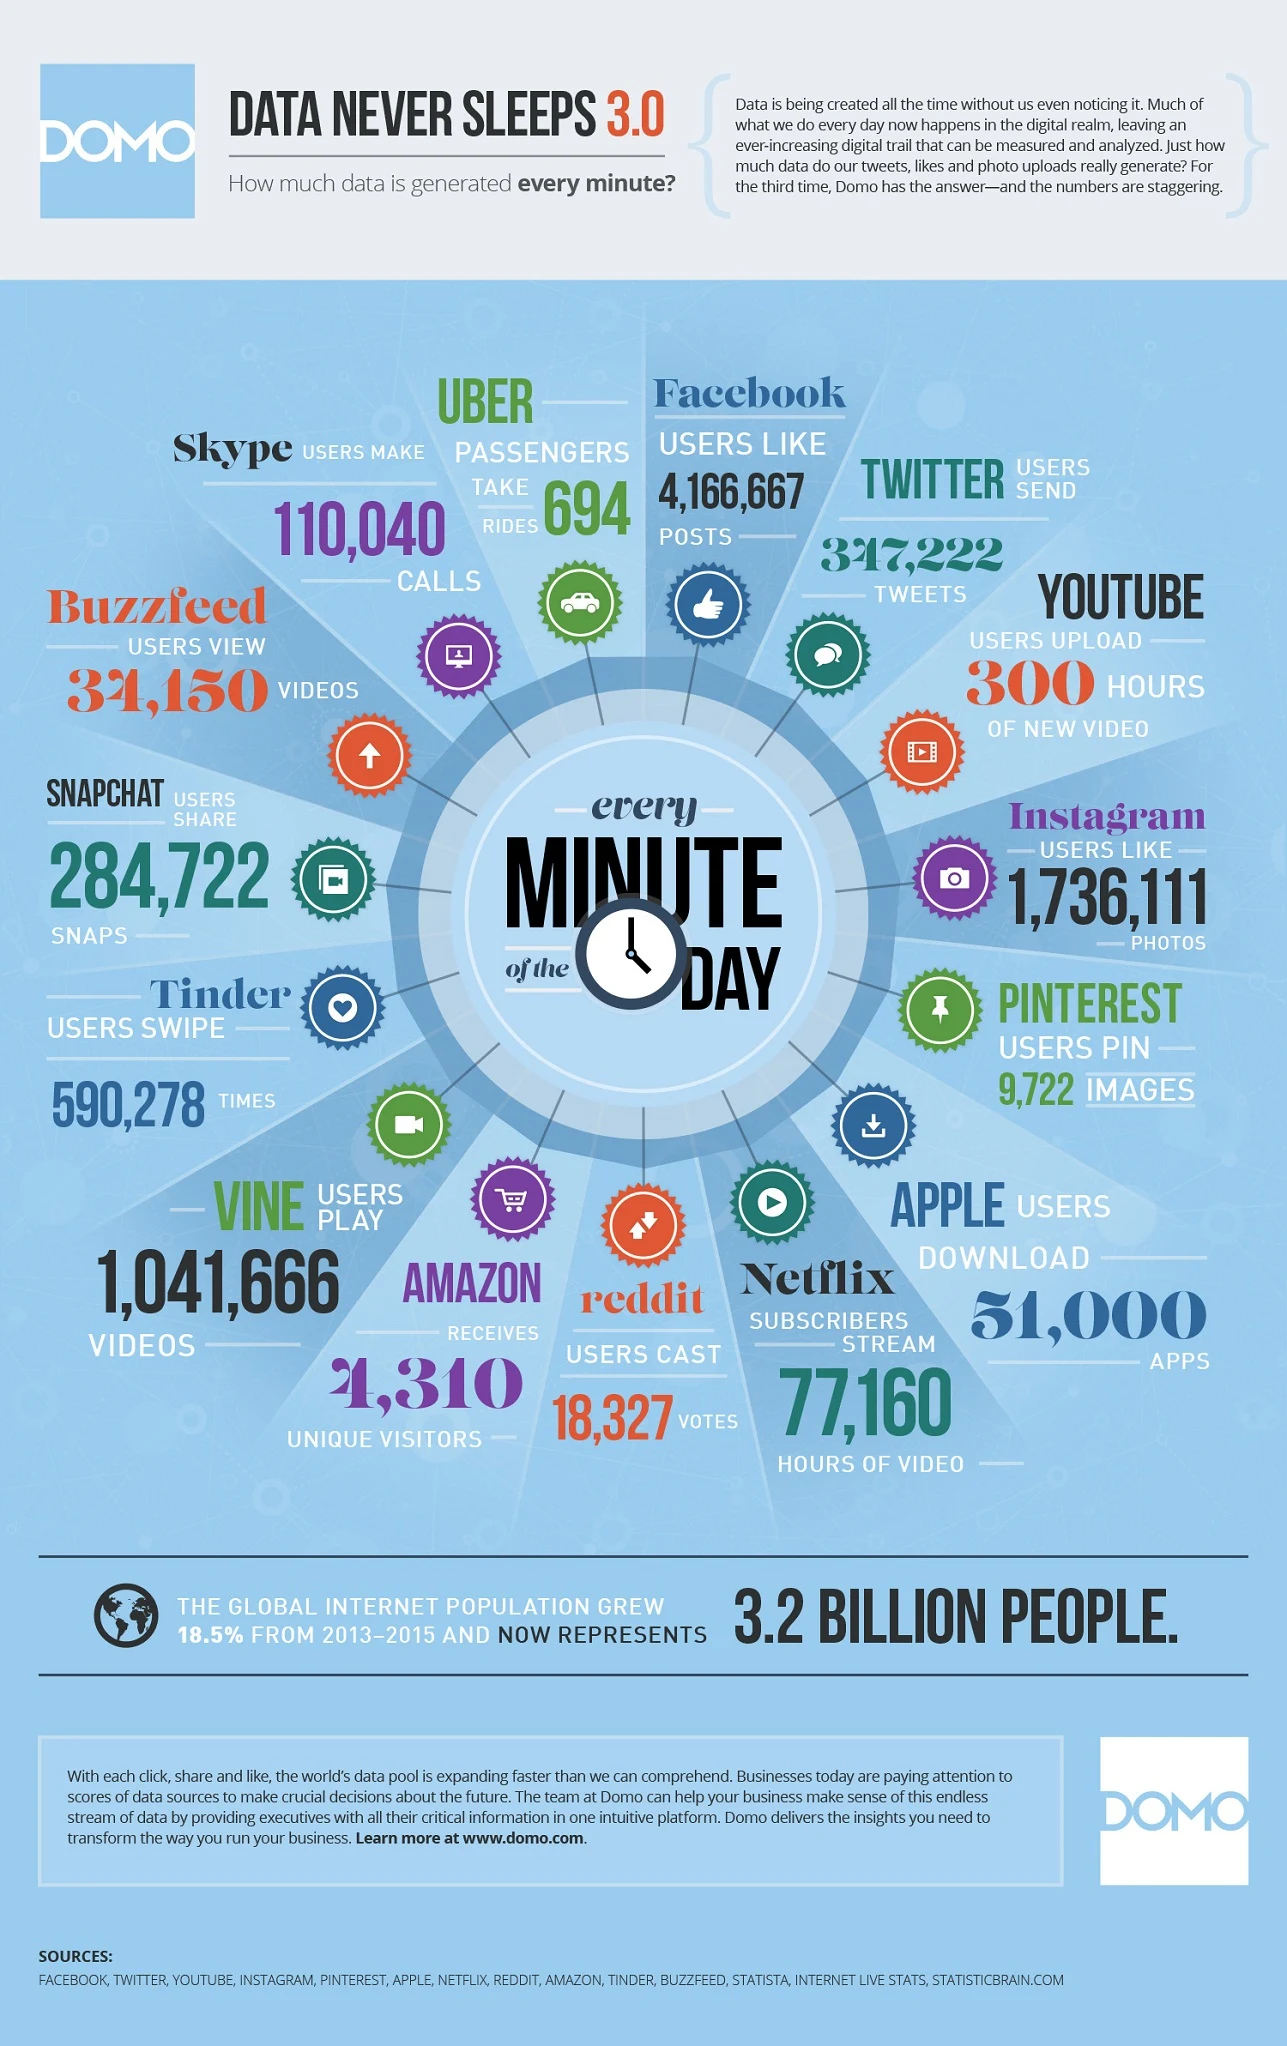 What Happens in Just One Minute on Facebook, Twitter, YouTube, Pinterest, Instagram, Reddit, Amazon, Vine, Tinder, Snapchat, Buzzfeed, Skype, Apple and Uber